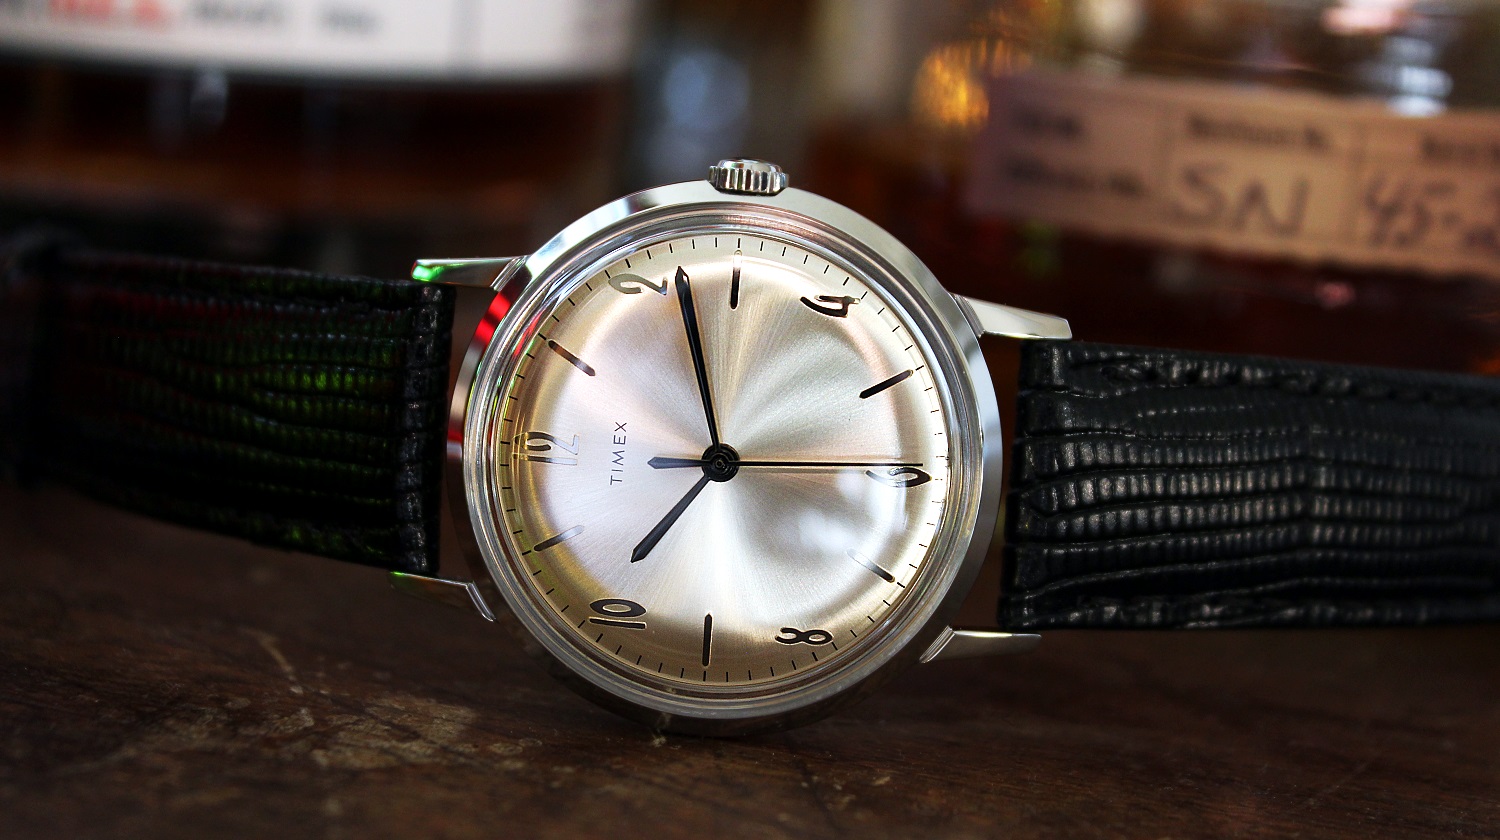 In Review: The Mechanical Timex Marlin